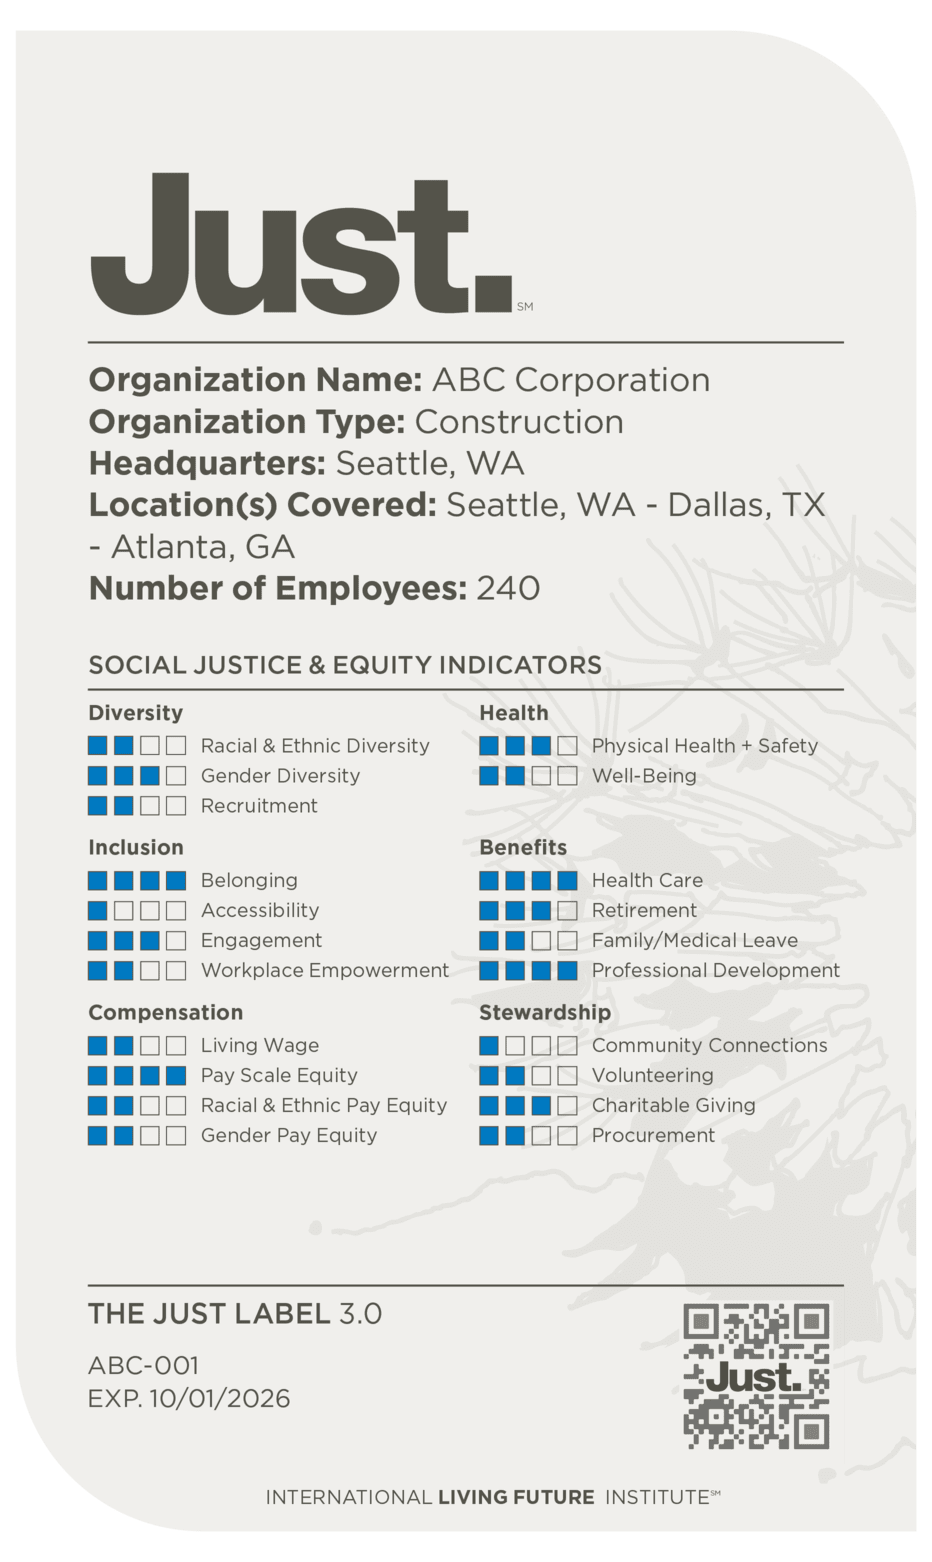 Just.
Organization Name: ABC Corporation
Organization Type: Construction
Headquarters: Seattle, WA
Location(s) Covered: Seattle, WA - Dallas, TX - Atlanta, GA
Number of Employees: 240

Social Justice & Equity Indicators:
DIVERISTY
[2/4] Racial & Ethnic Diversity
[3/4] Gender Diversity
[2/4] Recruitment

INCLUSION
[4/4] Belonging
[1/4] Accessibility
[3/4] Engagement
[2/4] Workplace Empowerment

COMPENSATION
[2/4] Living Wage
[4/4] Pay Scale Equity
[2/4] Racial & Ethnic Pay Equity
[2/4] Gender Pay Equity

HEALTH
[3/4] Physical Health + Safety
[2/4] Well-Being

BENEFITS
[4/4] Healthcare
[3/4] Retirement
[2/4] Family/Medical leave
[4/4] Professional Development

STEWARDSHIP
[1/4] Community Connections
[2/4] Volunteering
[3/4] Charitable Giving
[2/4] Procurement
